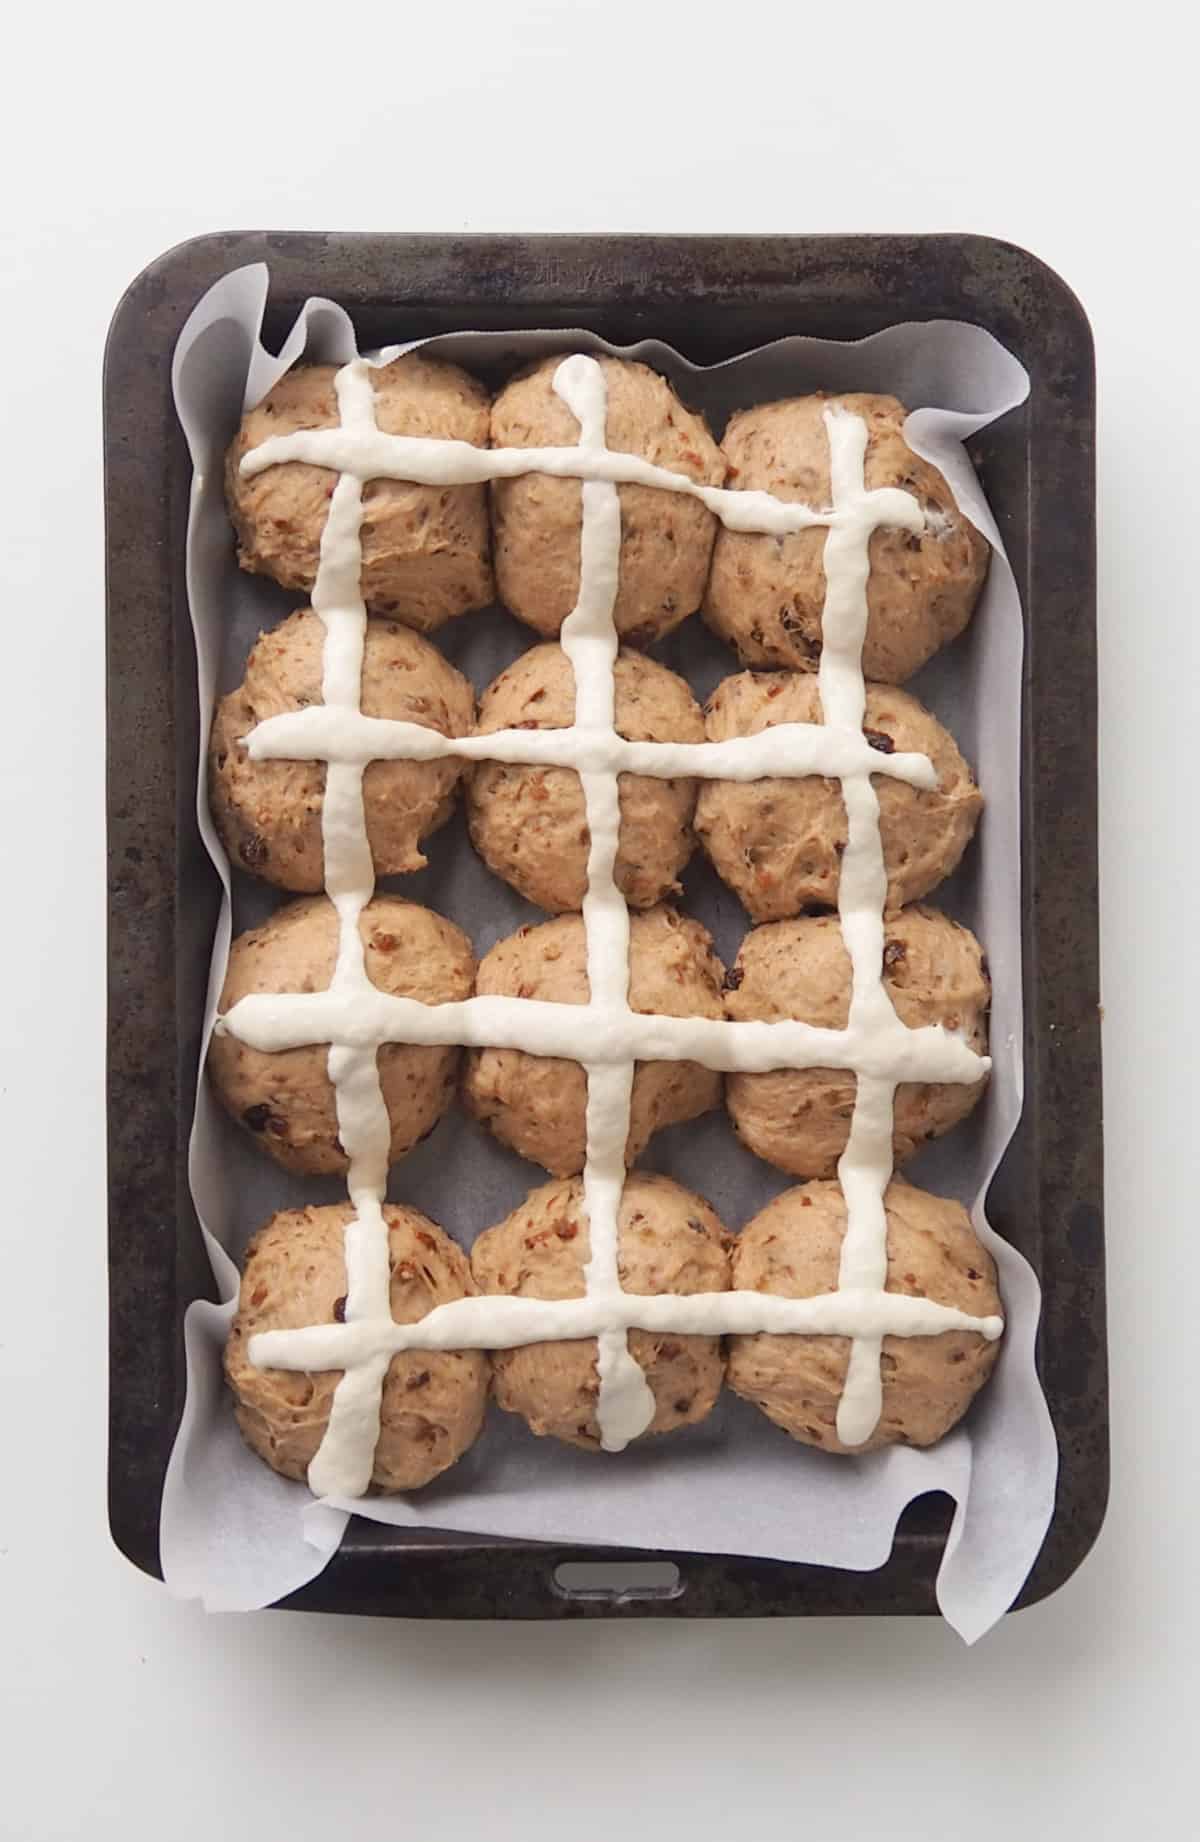 Hot Cross Buns with crosses piped ready to go into the oven.